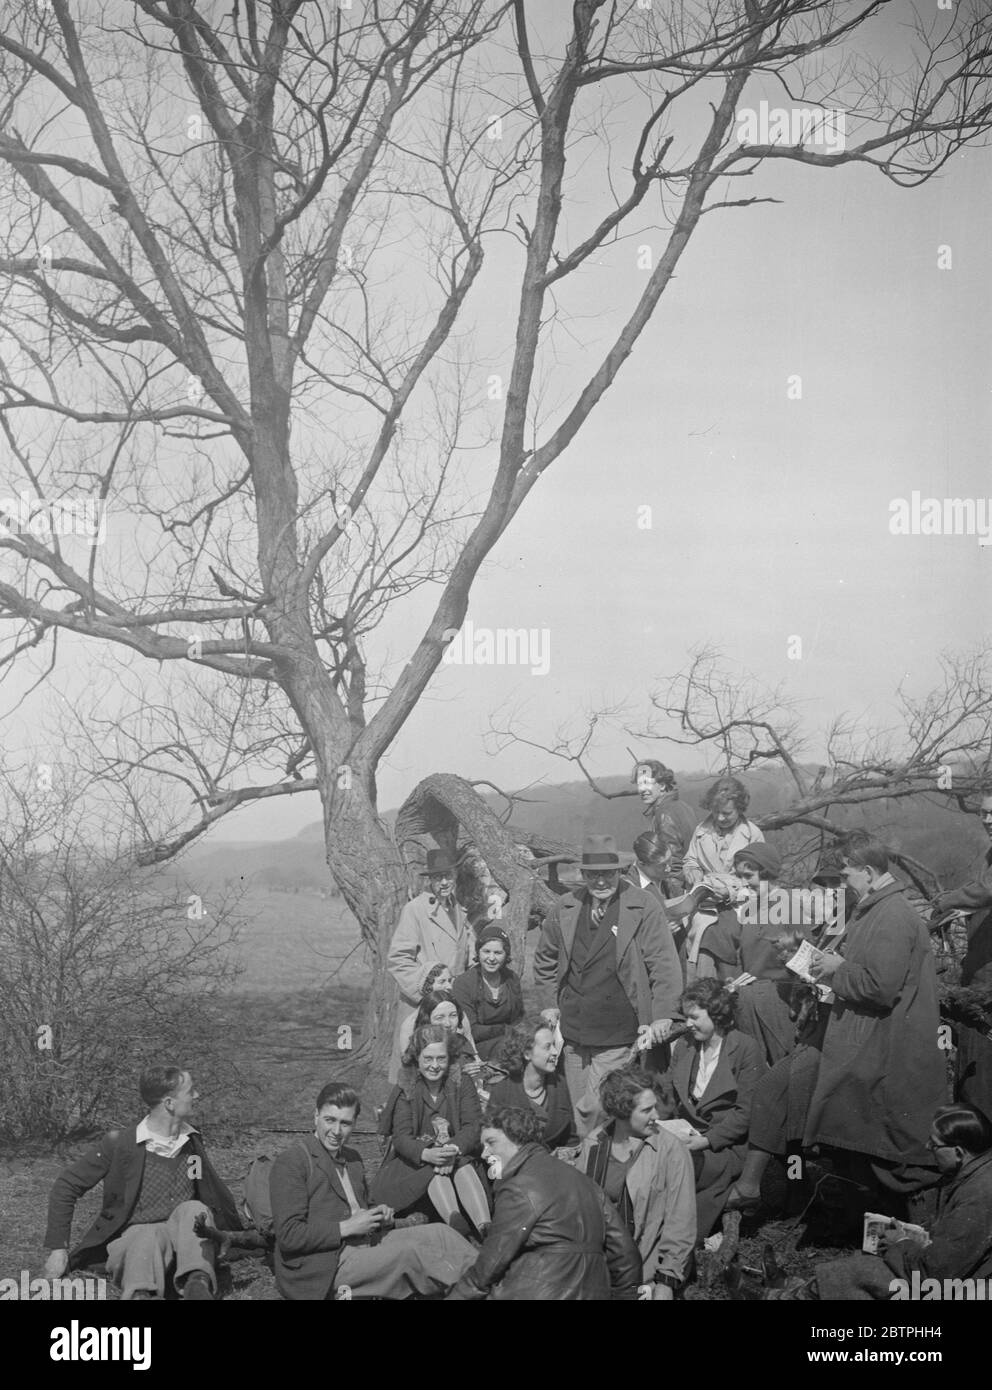 Hikers Mystery Express . Hikers from Mystery Express start ramble at Pangbourne . Hundreds of hikers who set out from London in a  Hikers Mystery Express  which left Paddington for an unknown destination , left the train at Pangbourne , Berkshire , for a ramble in the sunshine . The long line of hikers in the sunshine along the river path at Pangbourne . 25 March 1932 Stock Photo